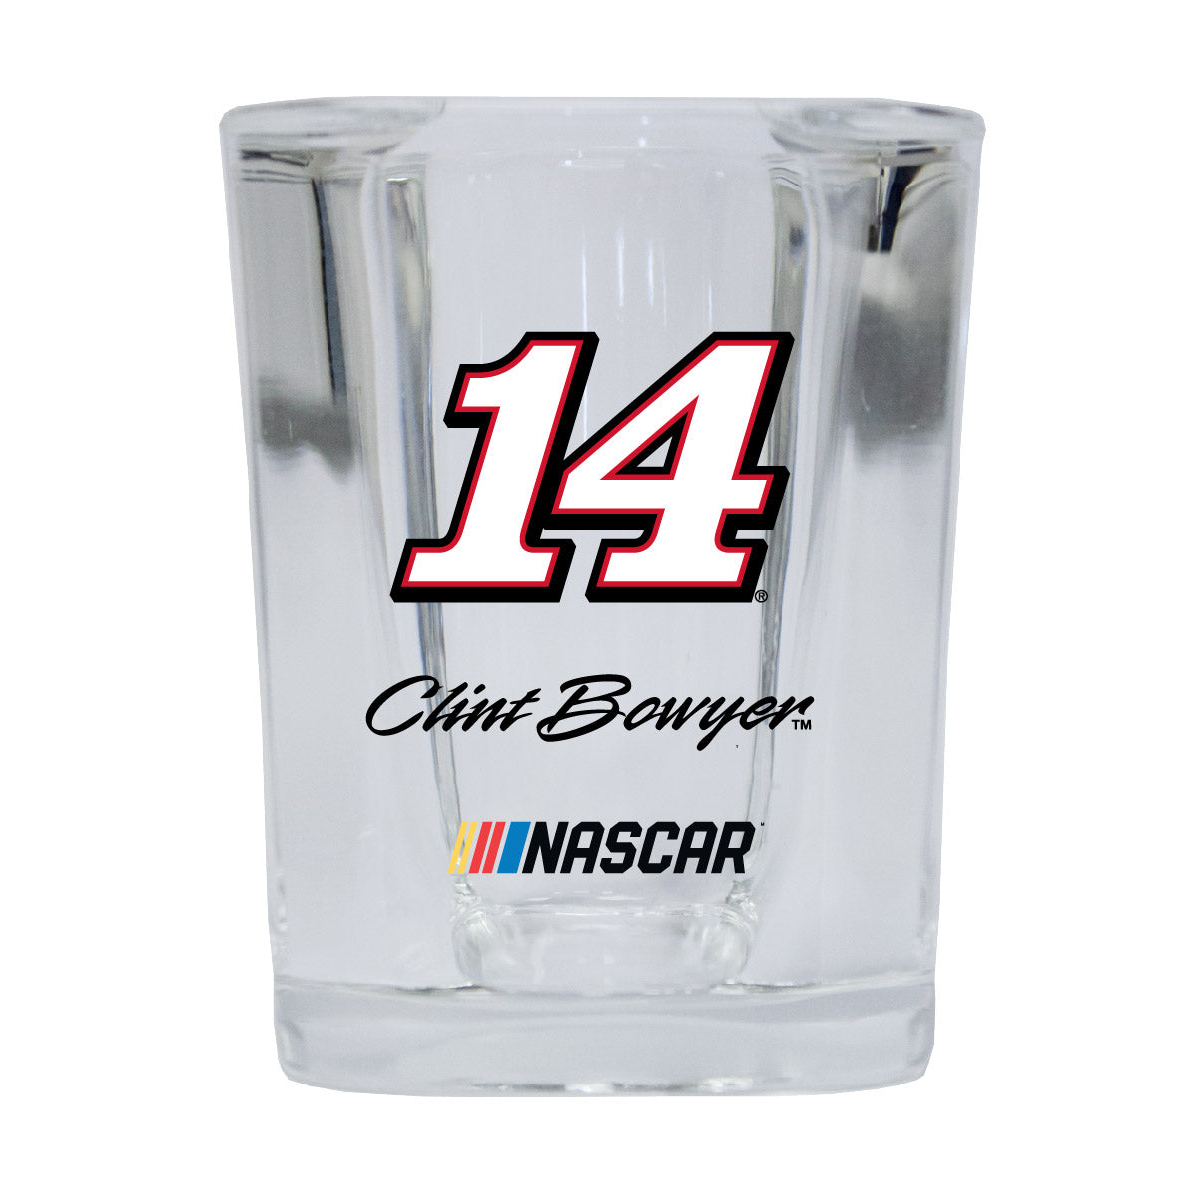 R And R Imports Officially Licensed NASCAR Clint Bowyer #14 Shot Glass Square New For 2020